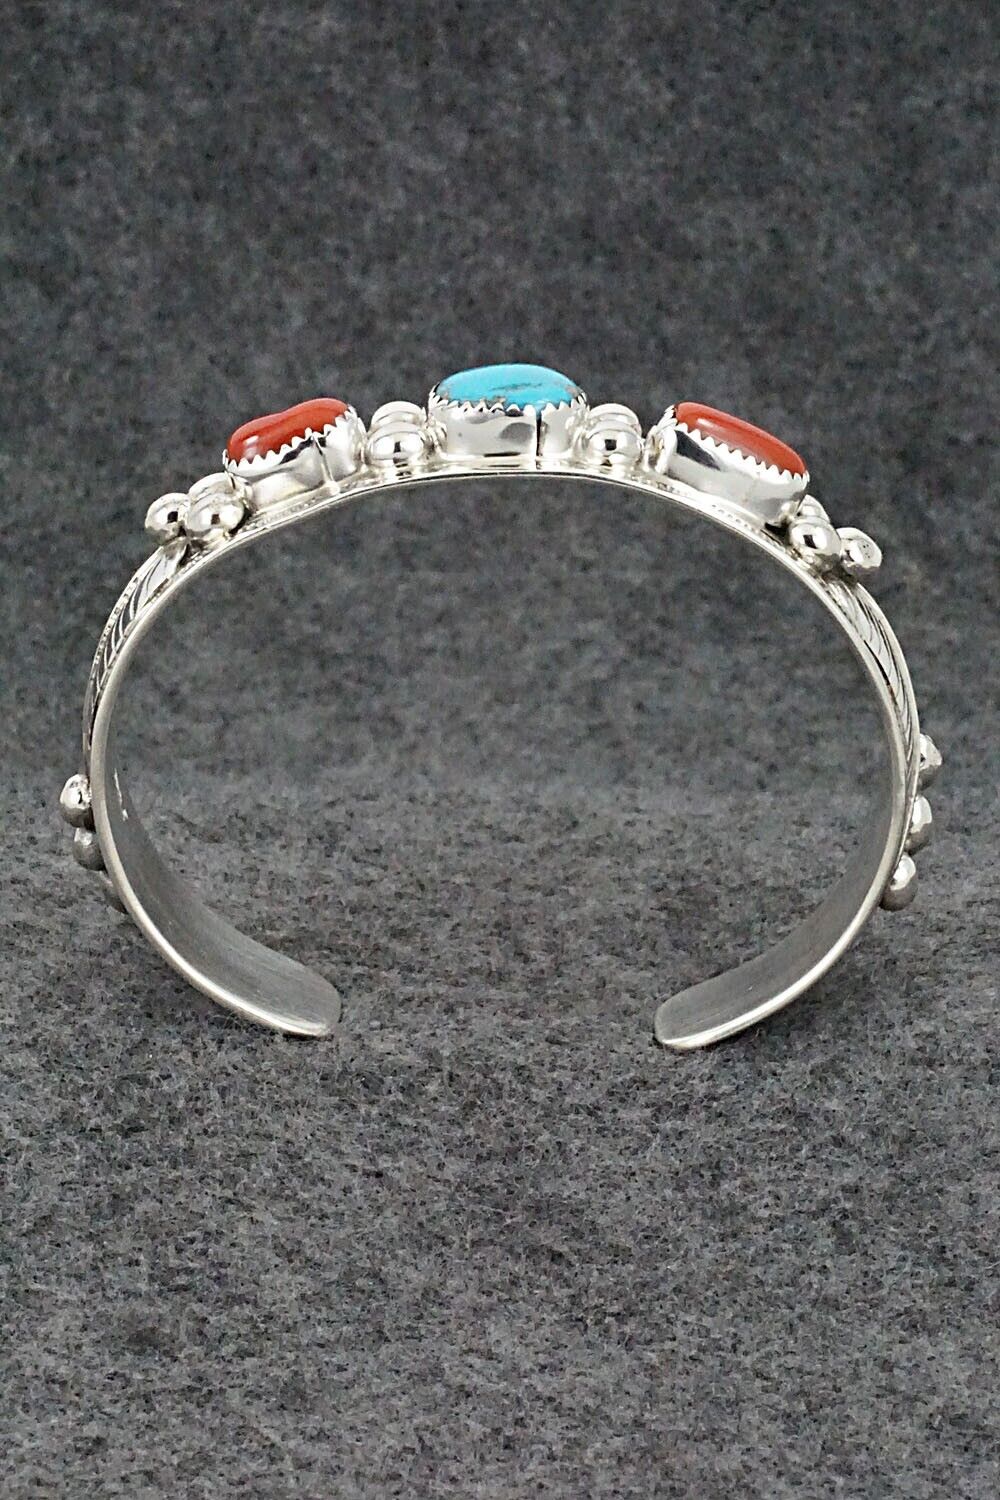 Turquoise, Coral & Sterling Silver Bracelet - Wilbur Myers